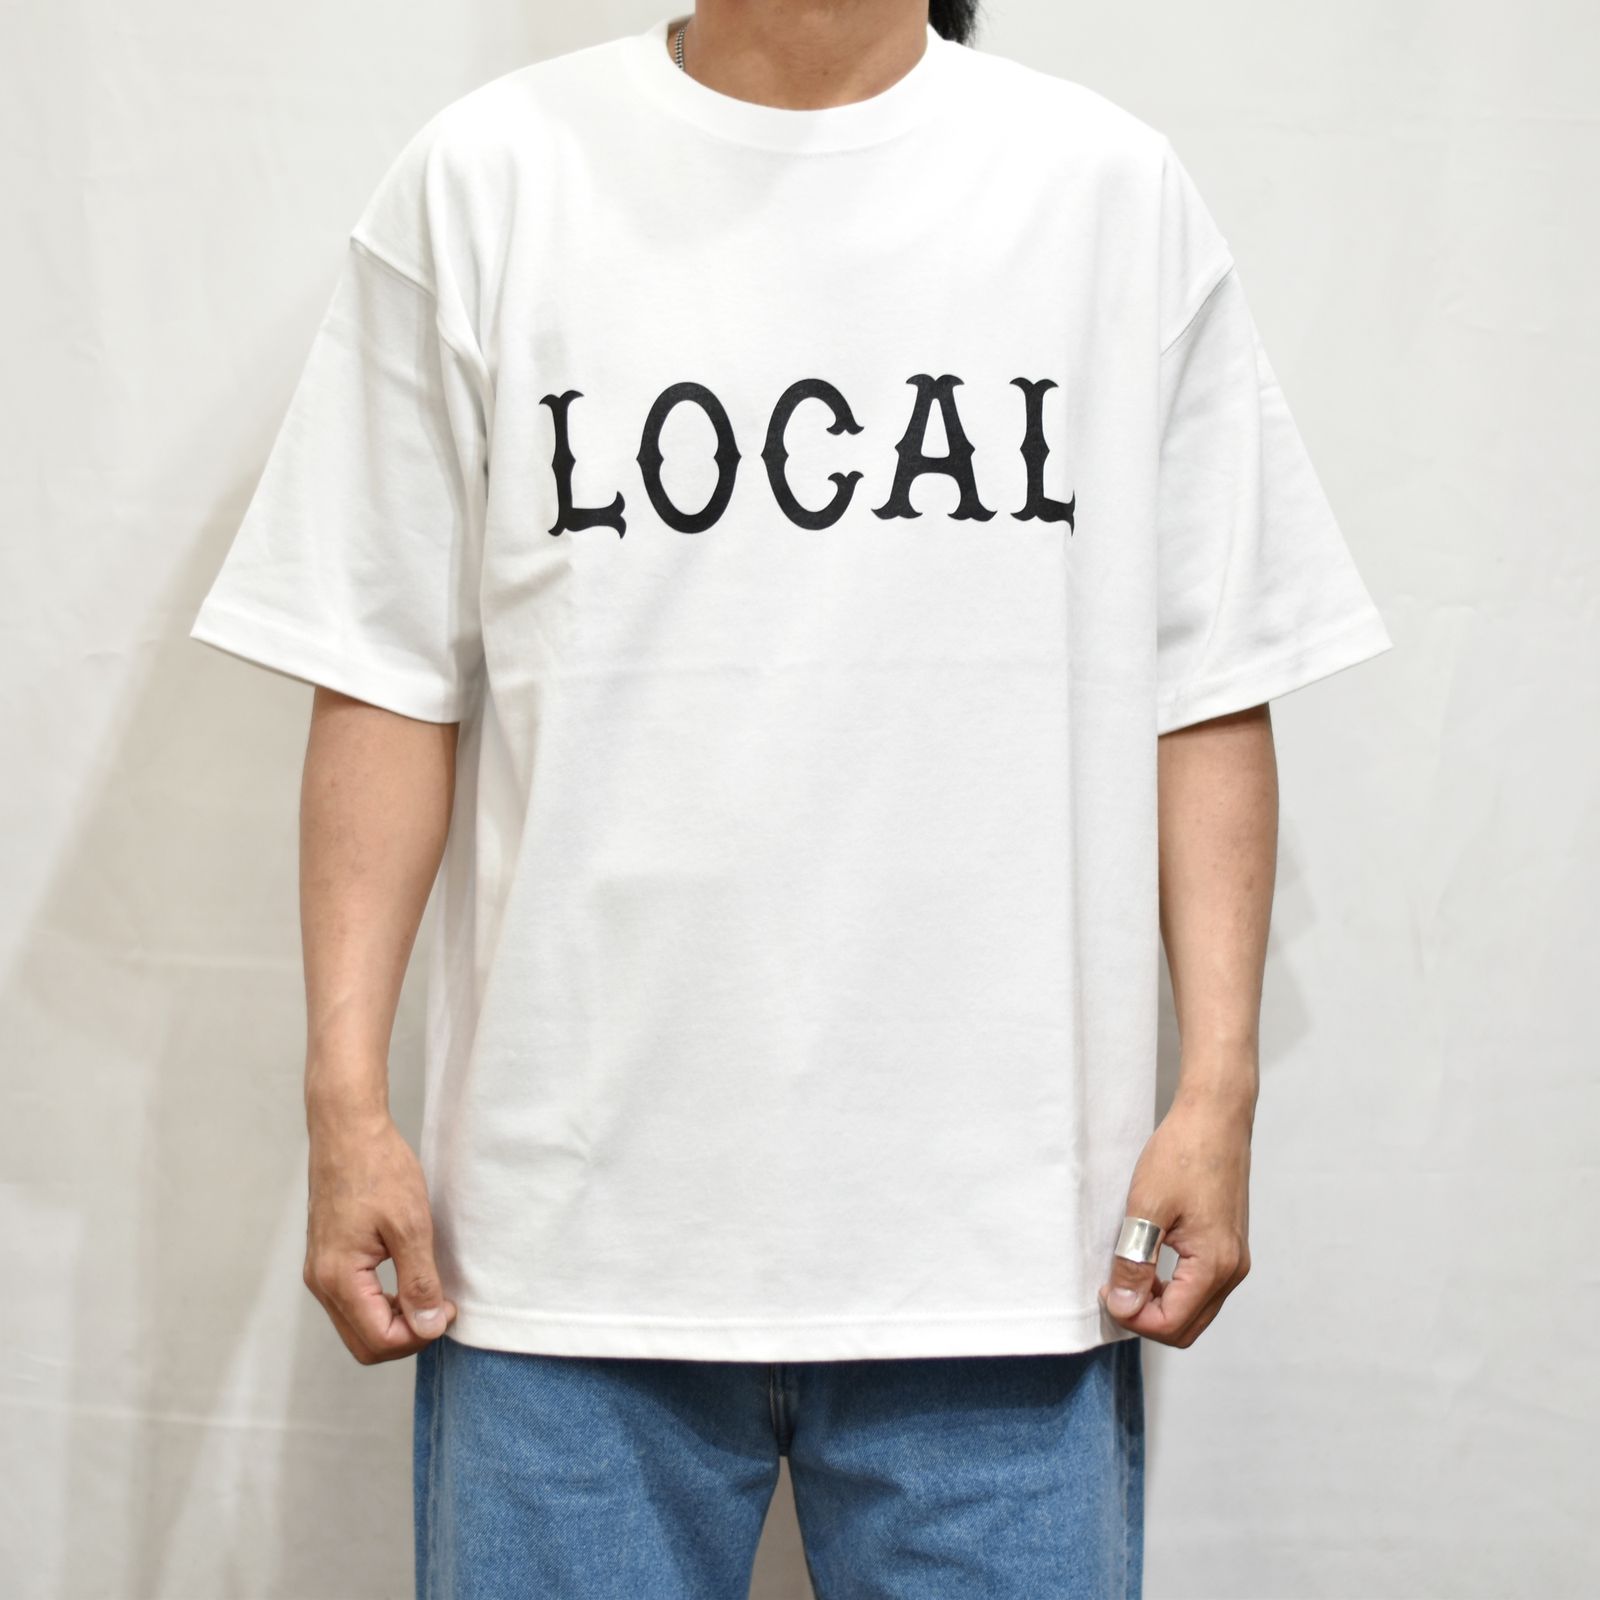 CUTRATE - CUTRATE CLASSIC LOCAL LOGO HEAVY WEIGHT DROPSHOULDER S/S